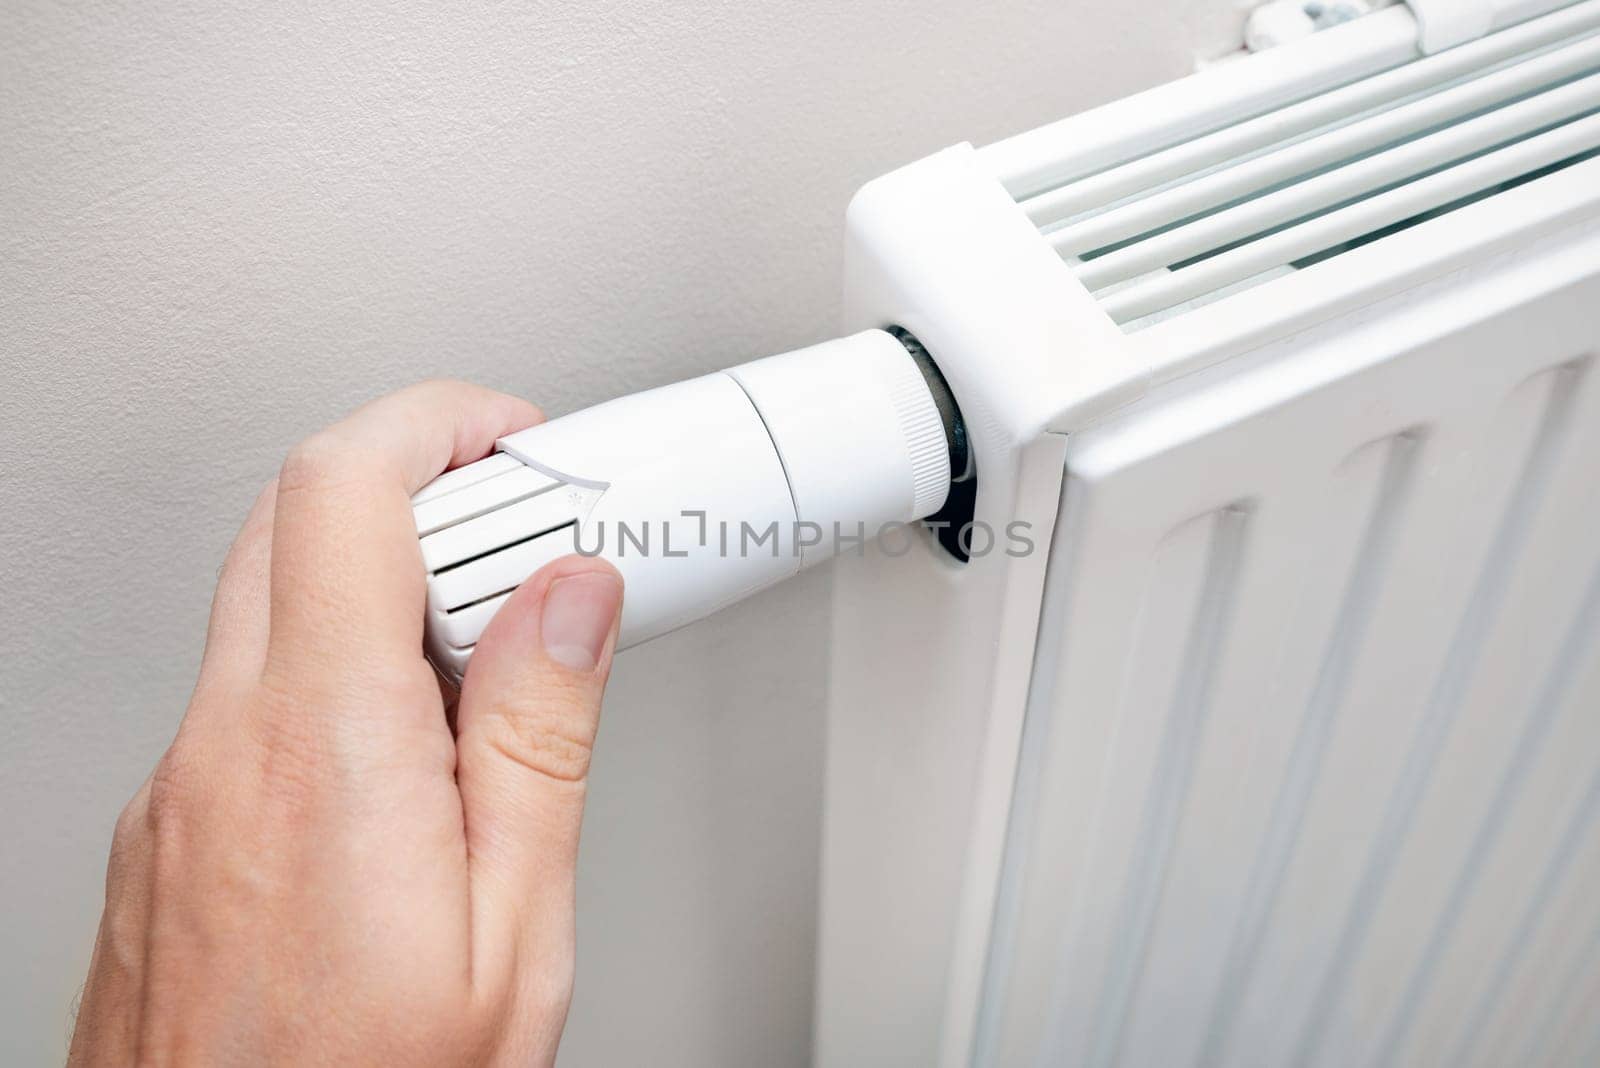 Radiator, expensive heating cost by simpson33